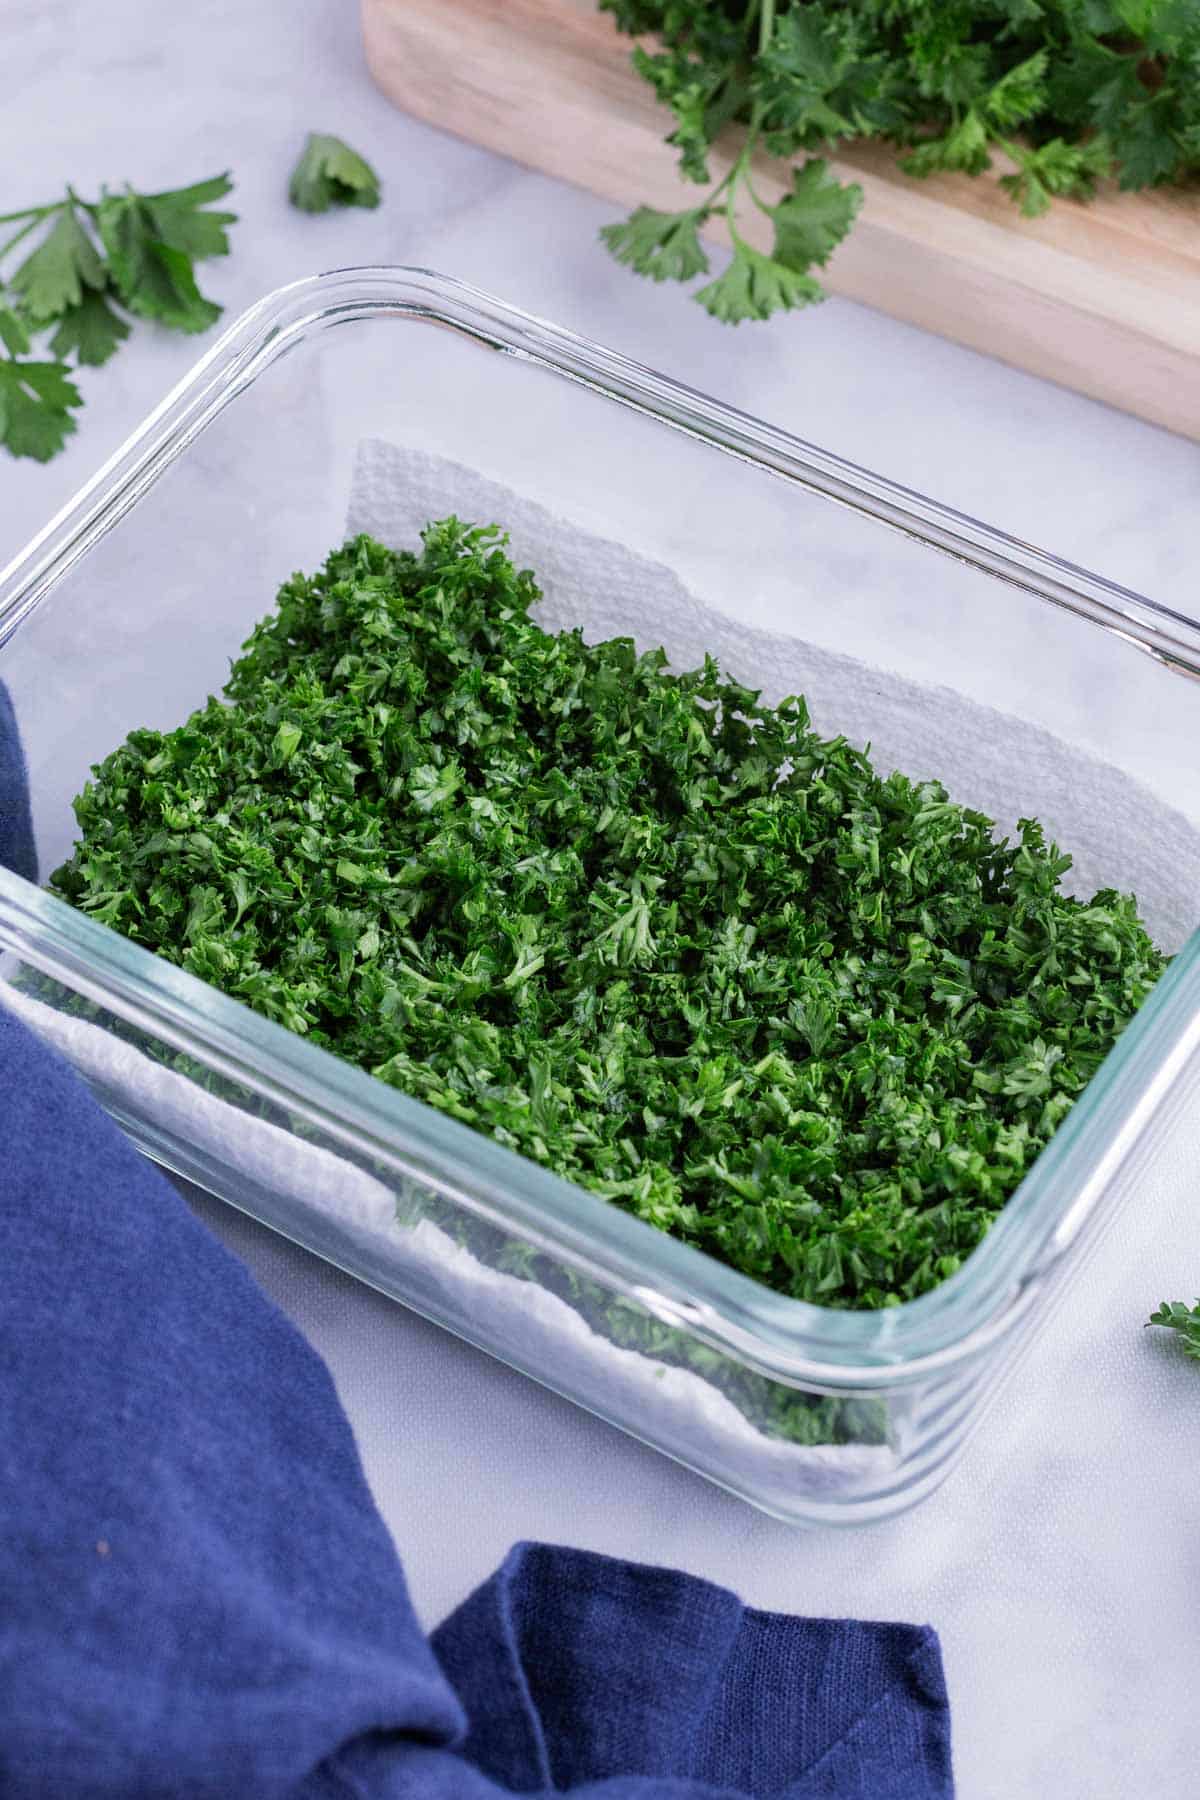 Chopped parsley is stored in a glass container.